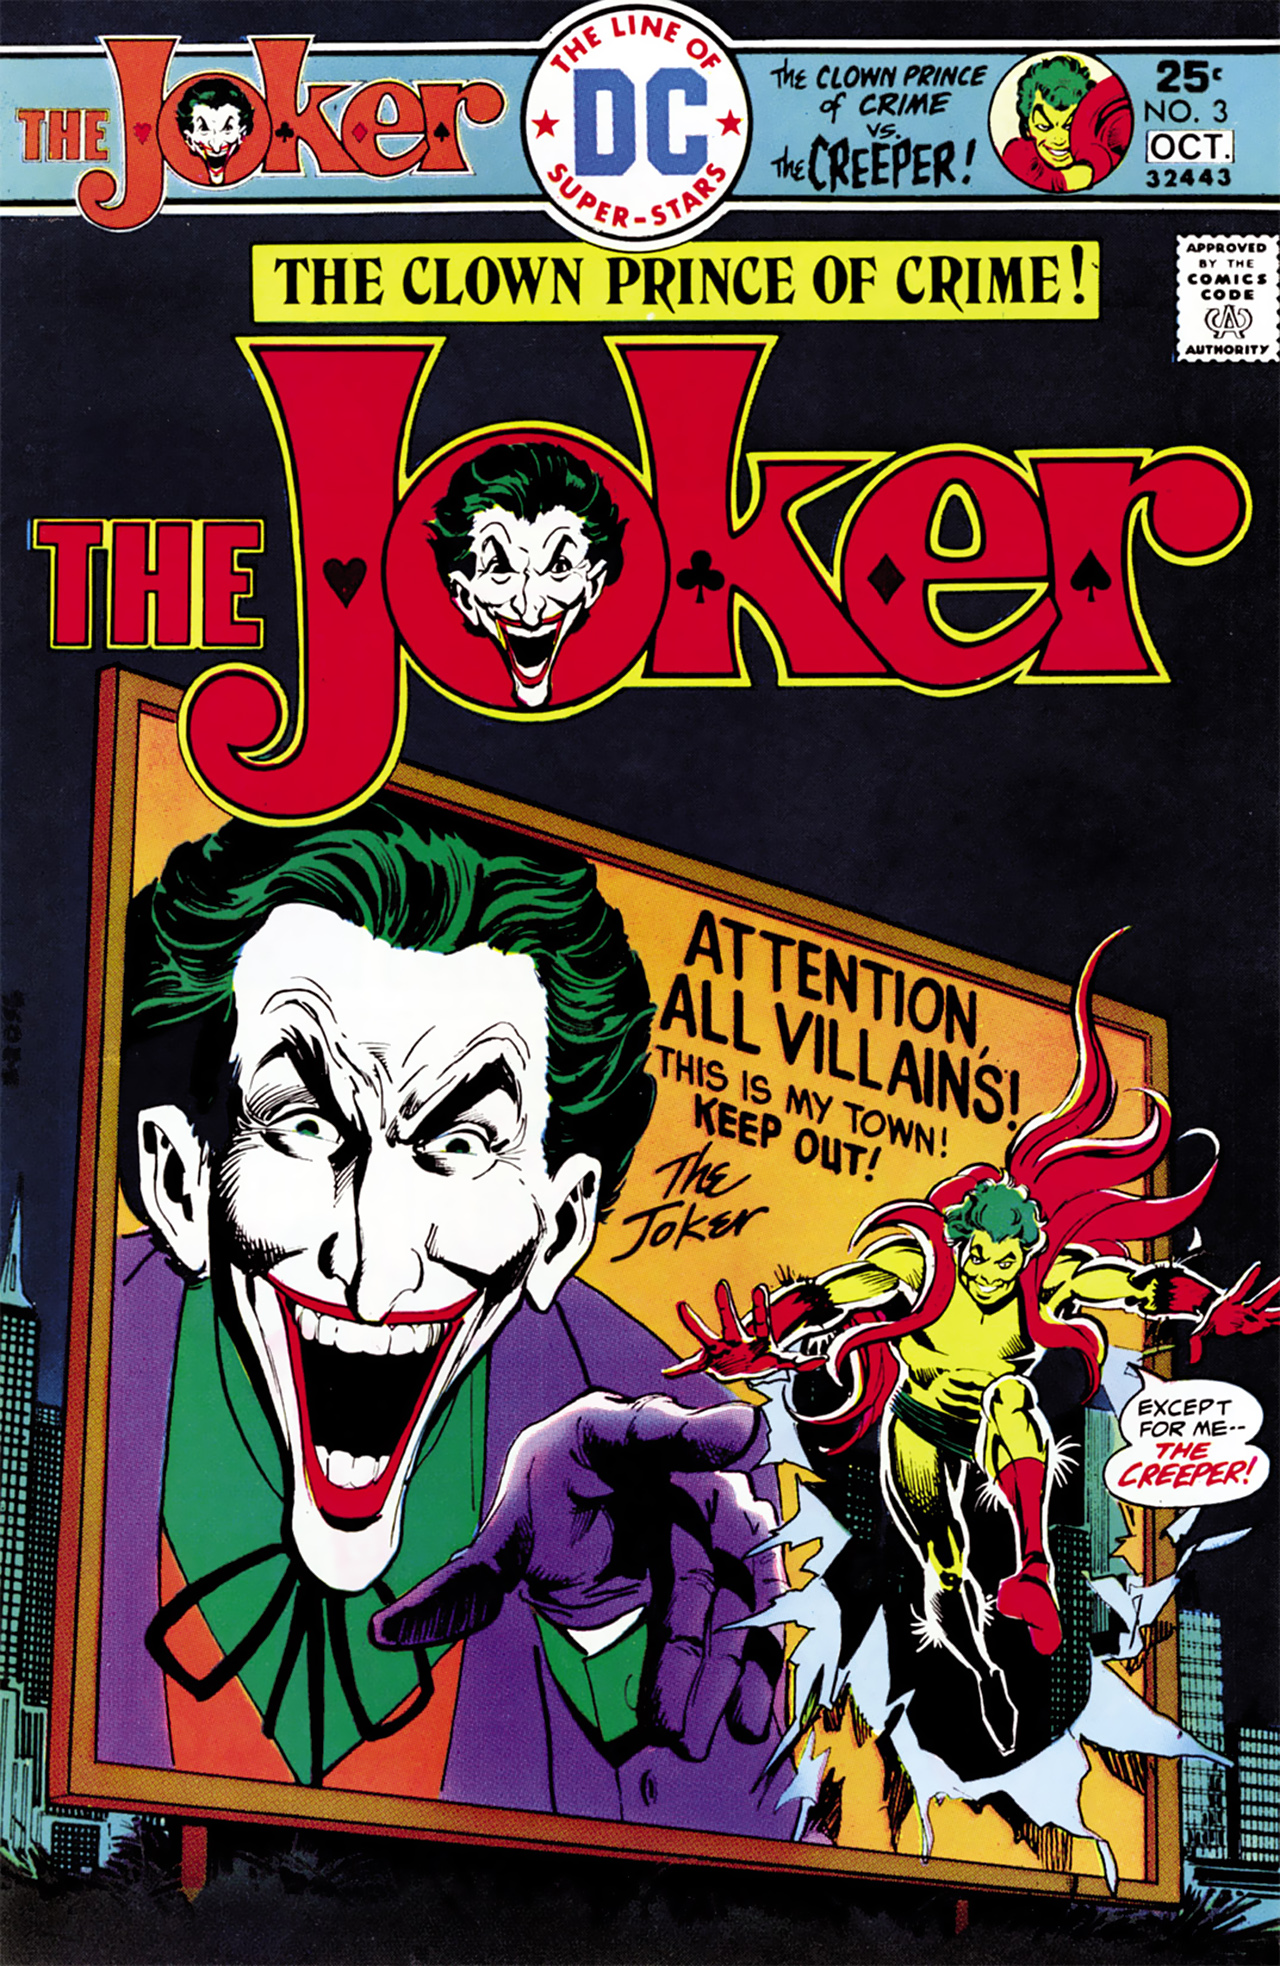 The Joker (1975-1976 + 2019): Chapter 3 - Page 1